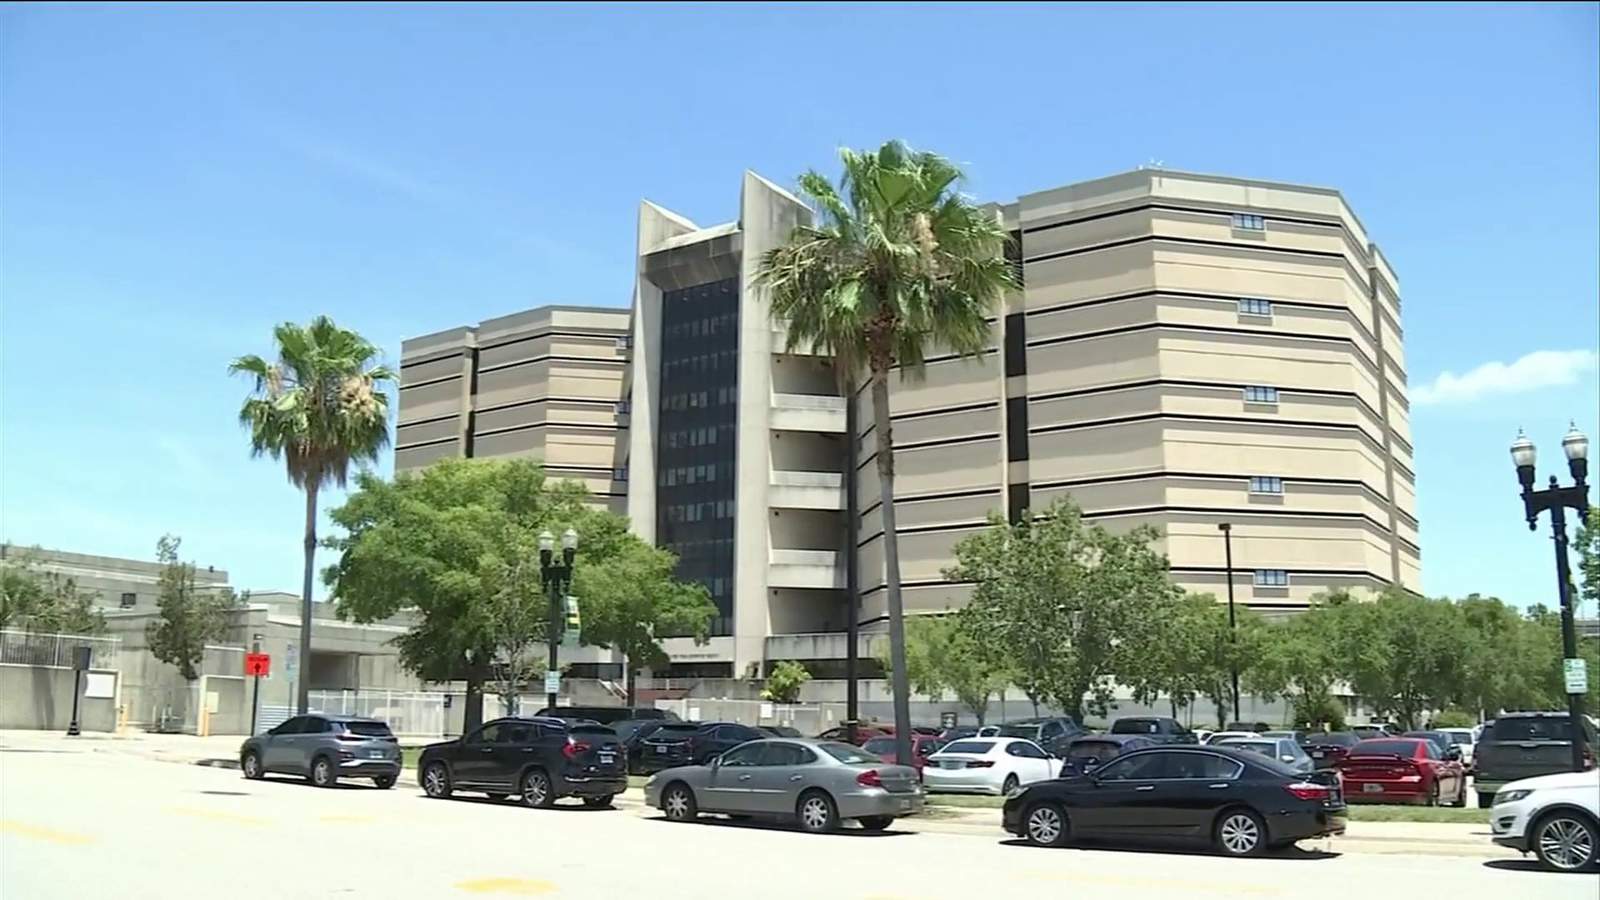 Over 2000 people tested for coronavirus in Duval County Jail